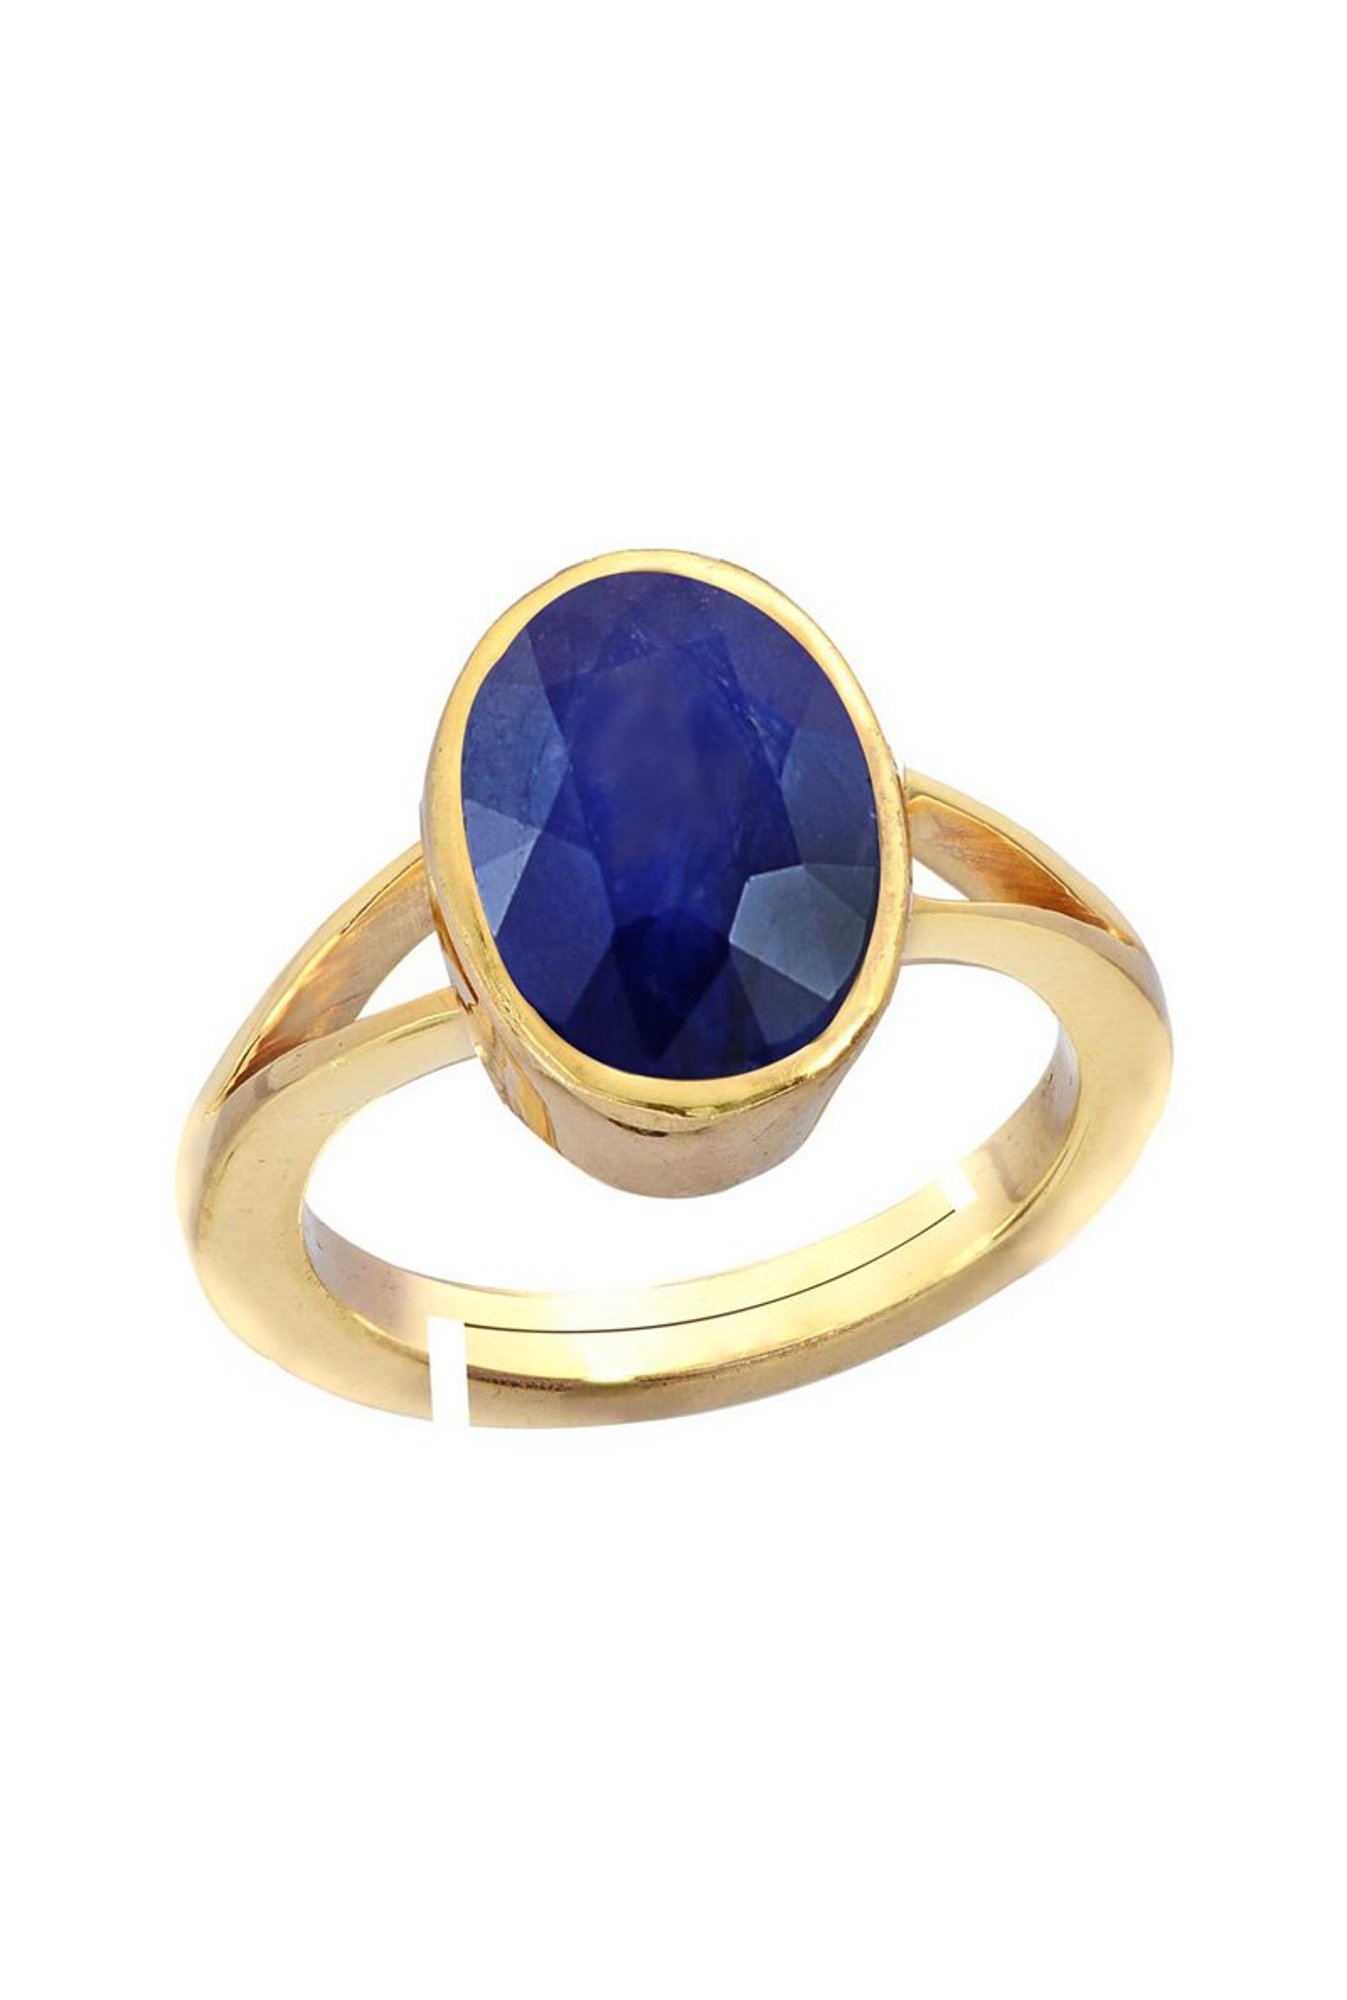 BLUE SAPPHIRE NATURAL STONE RING, Feature : Durable, Fine Finishing, Good  Quality, Light Weight, Shiny Look at Rs 1,200 / Box in Delhi